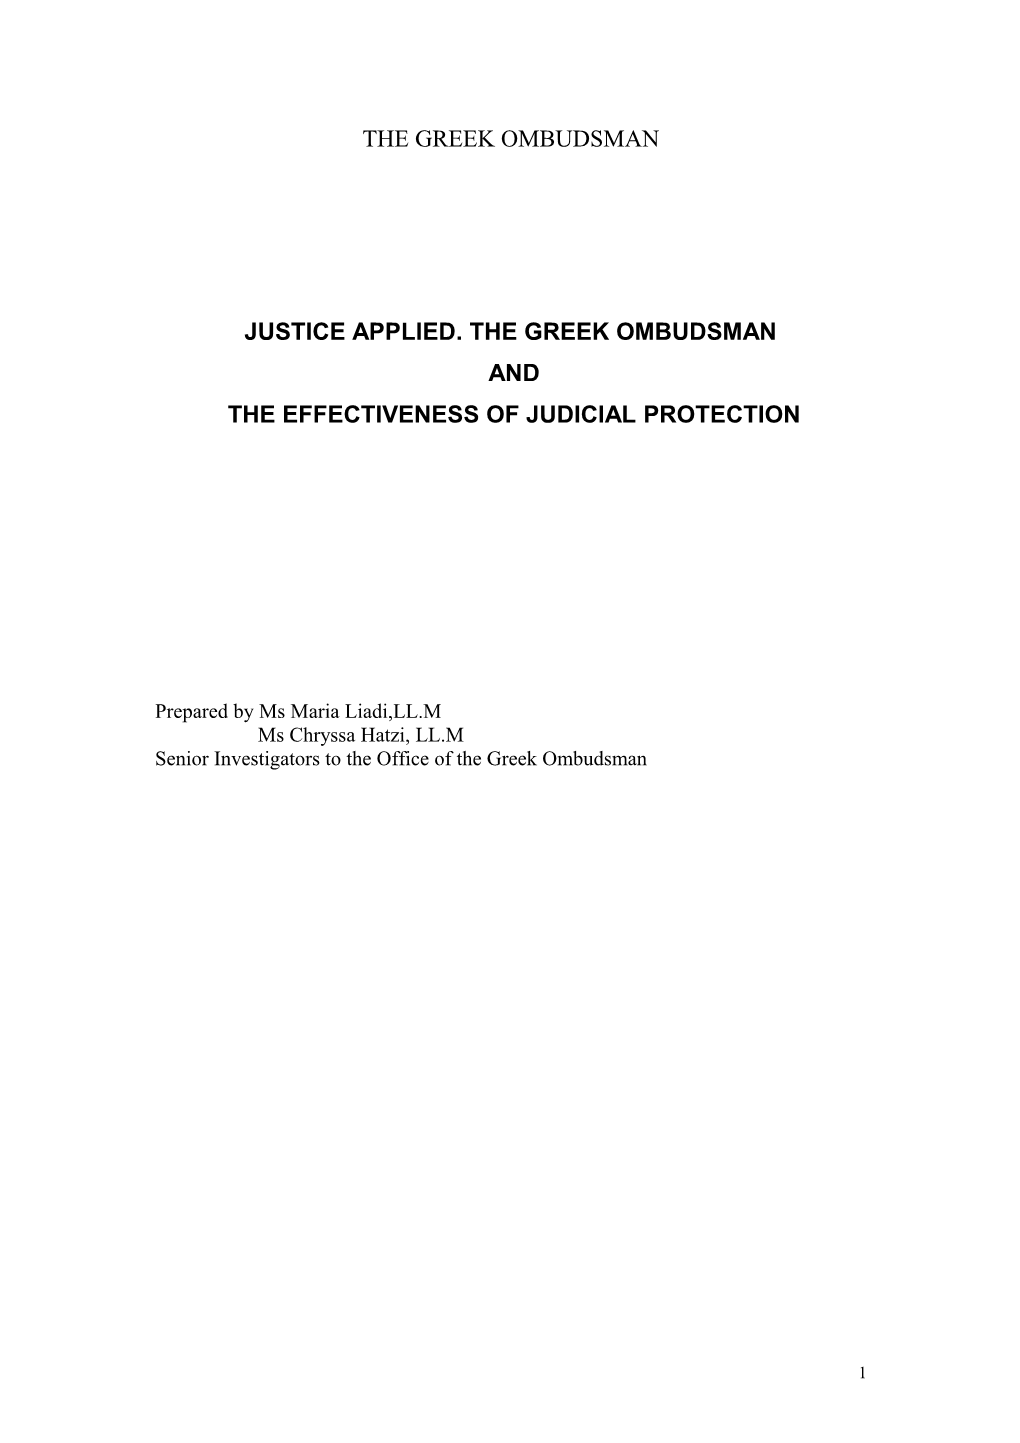 Justice Applied. the Greek Ombudsman